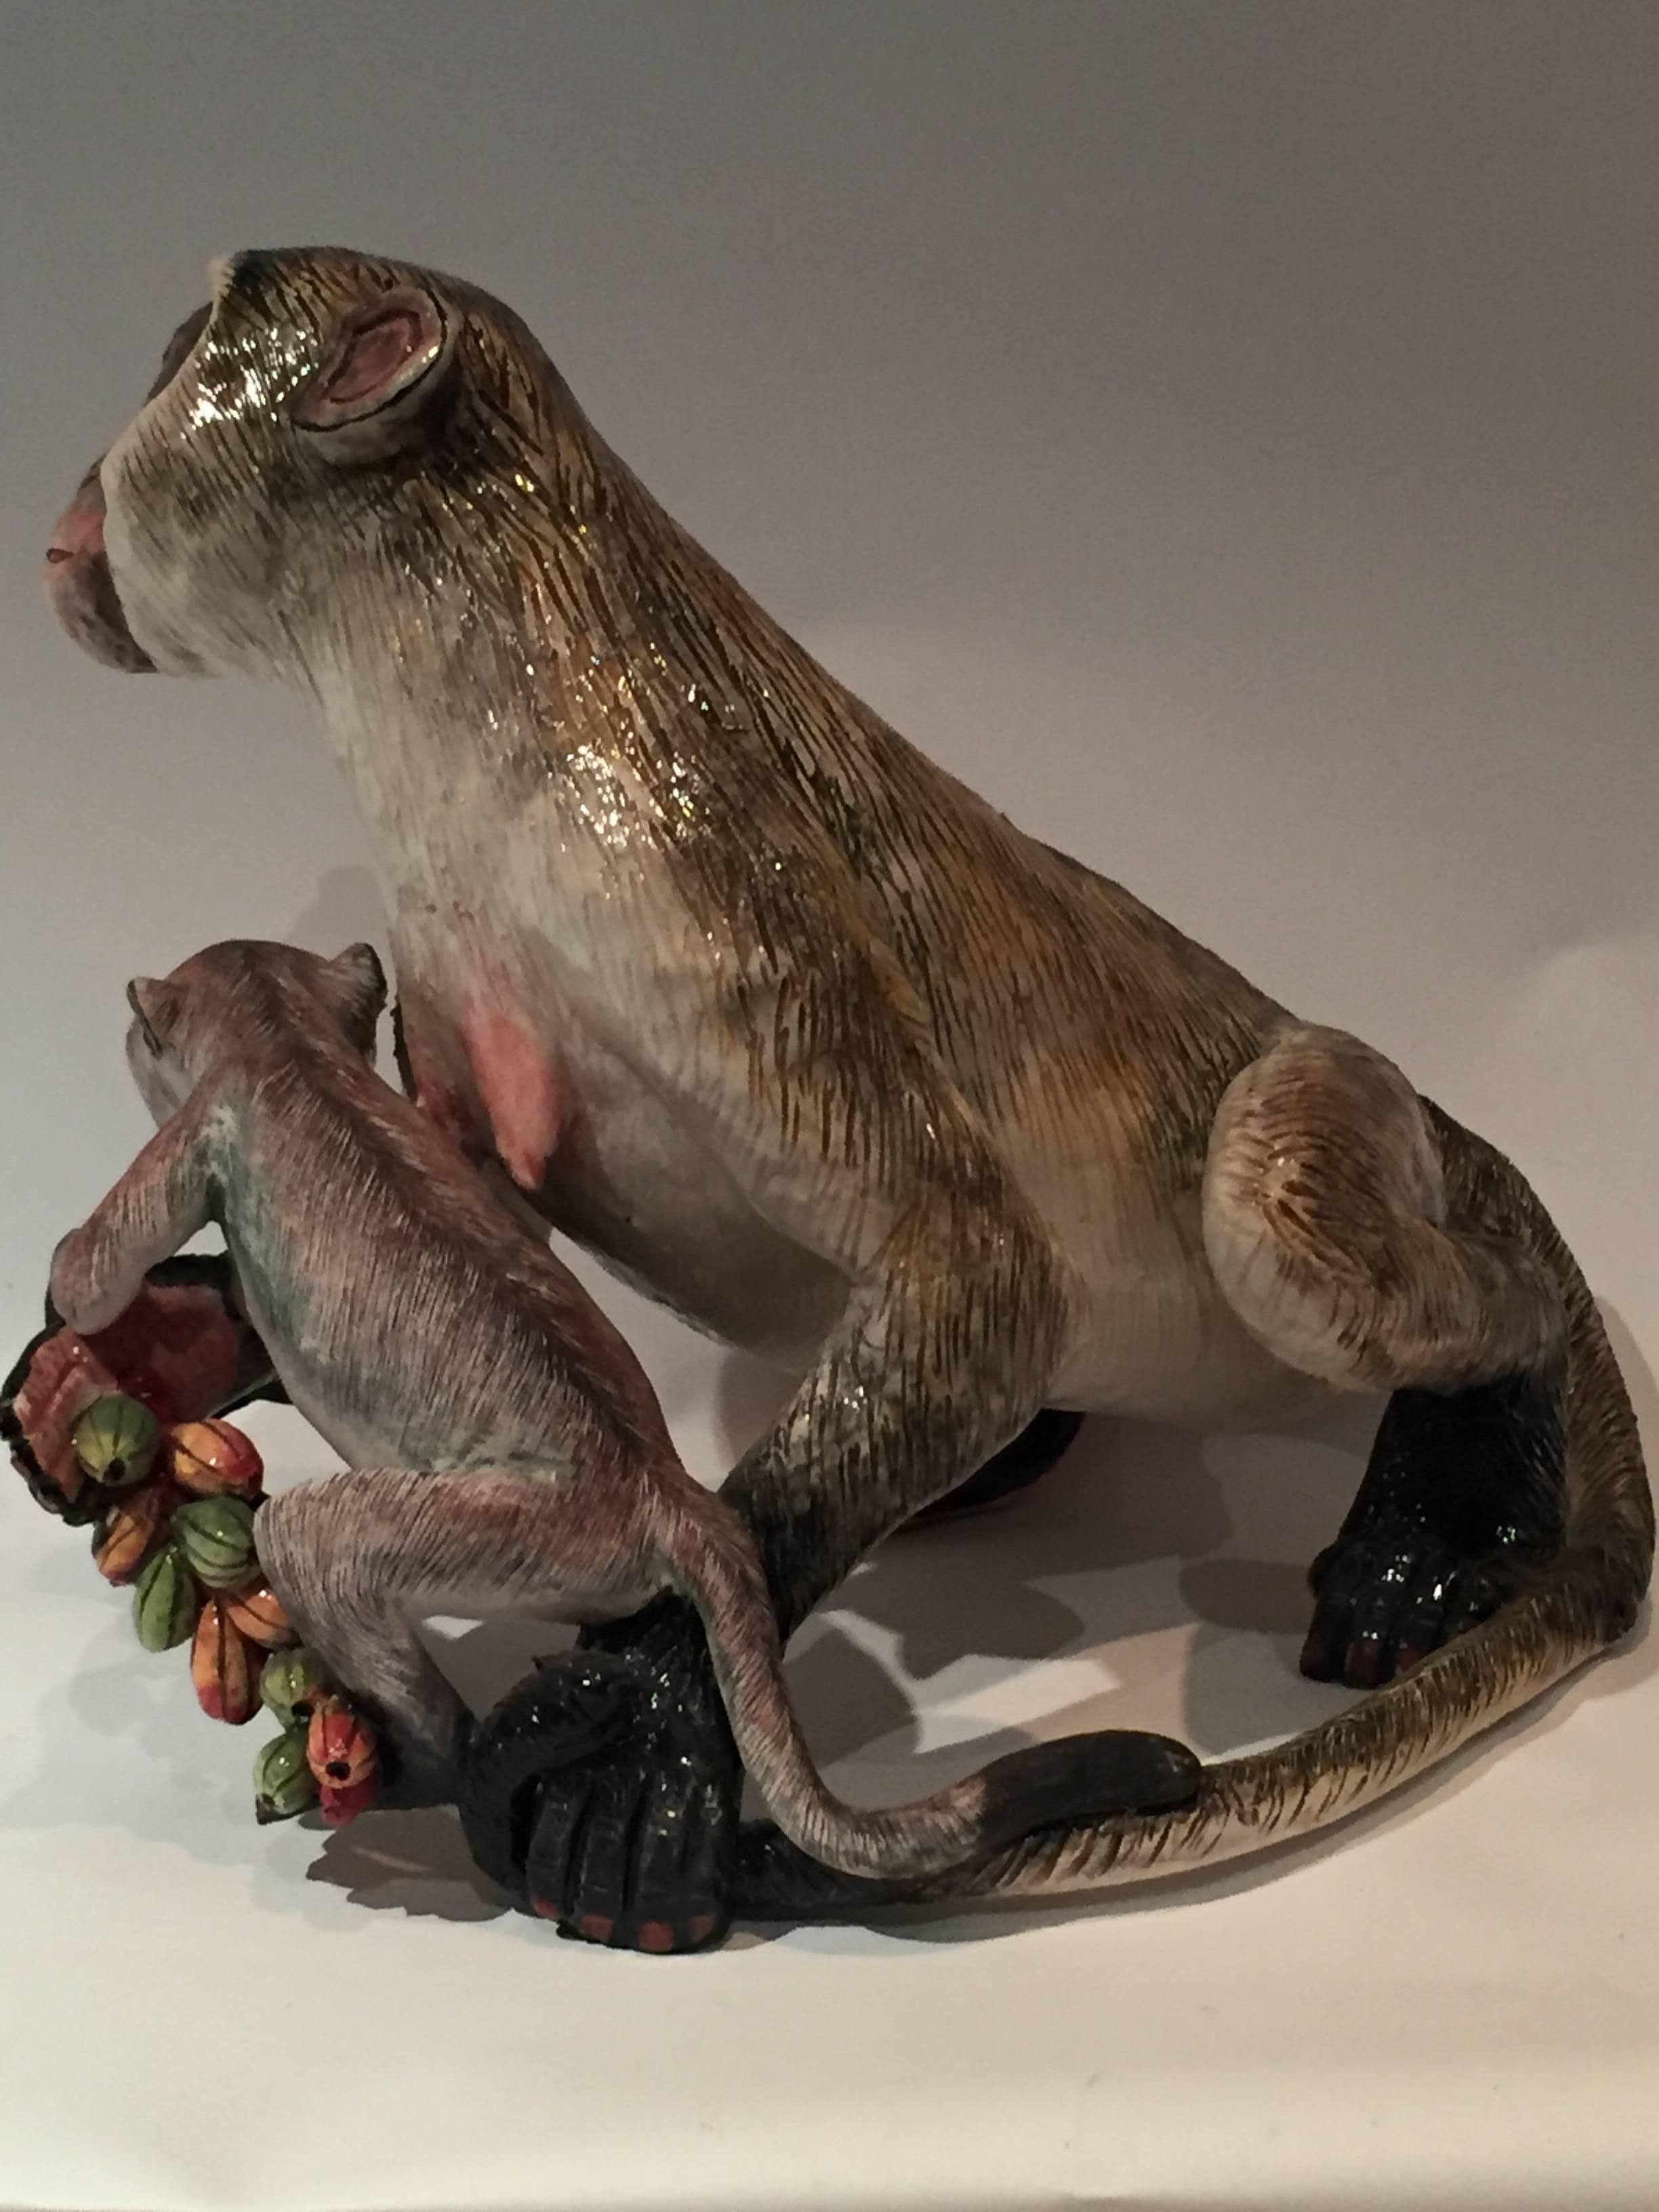 Folk Art Monkey Mother and Baby Ceramic Sculpture by Ardmore from South Africa